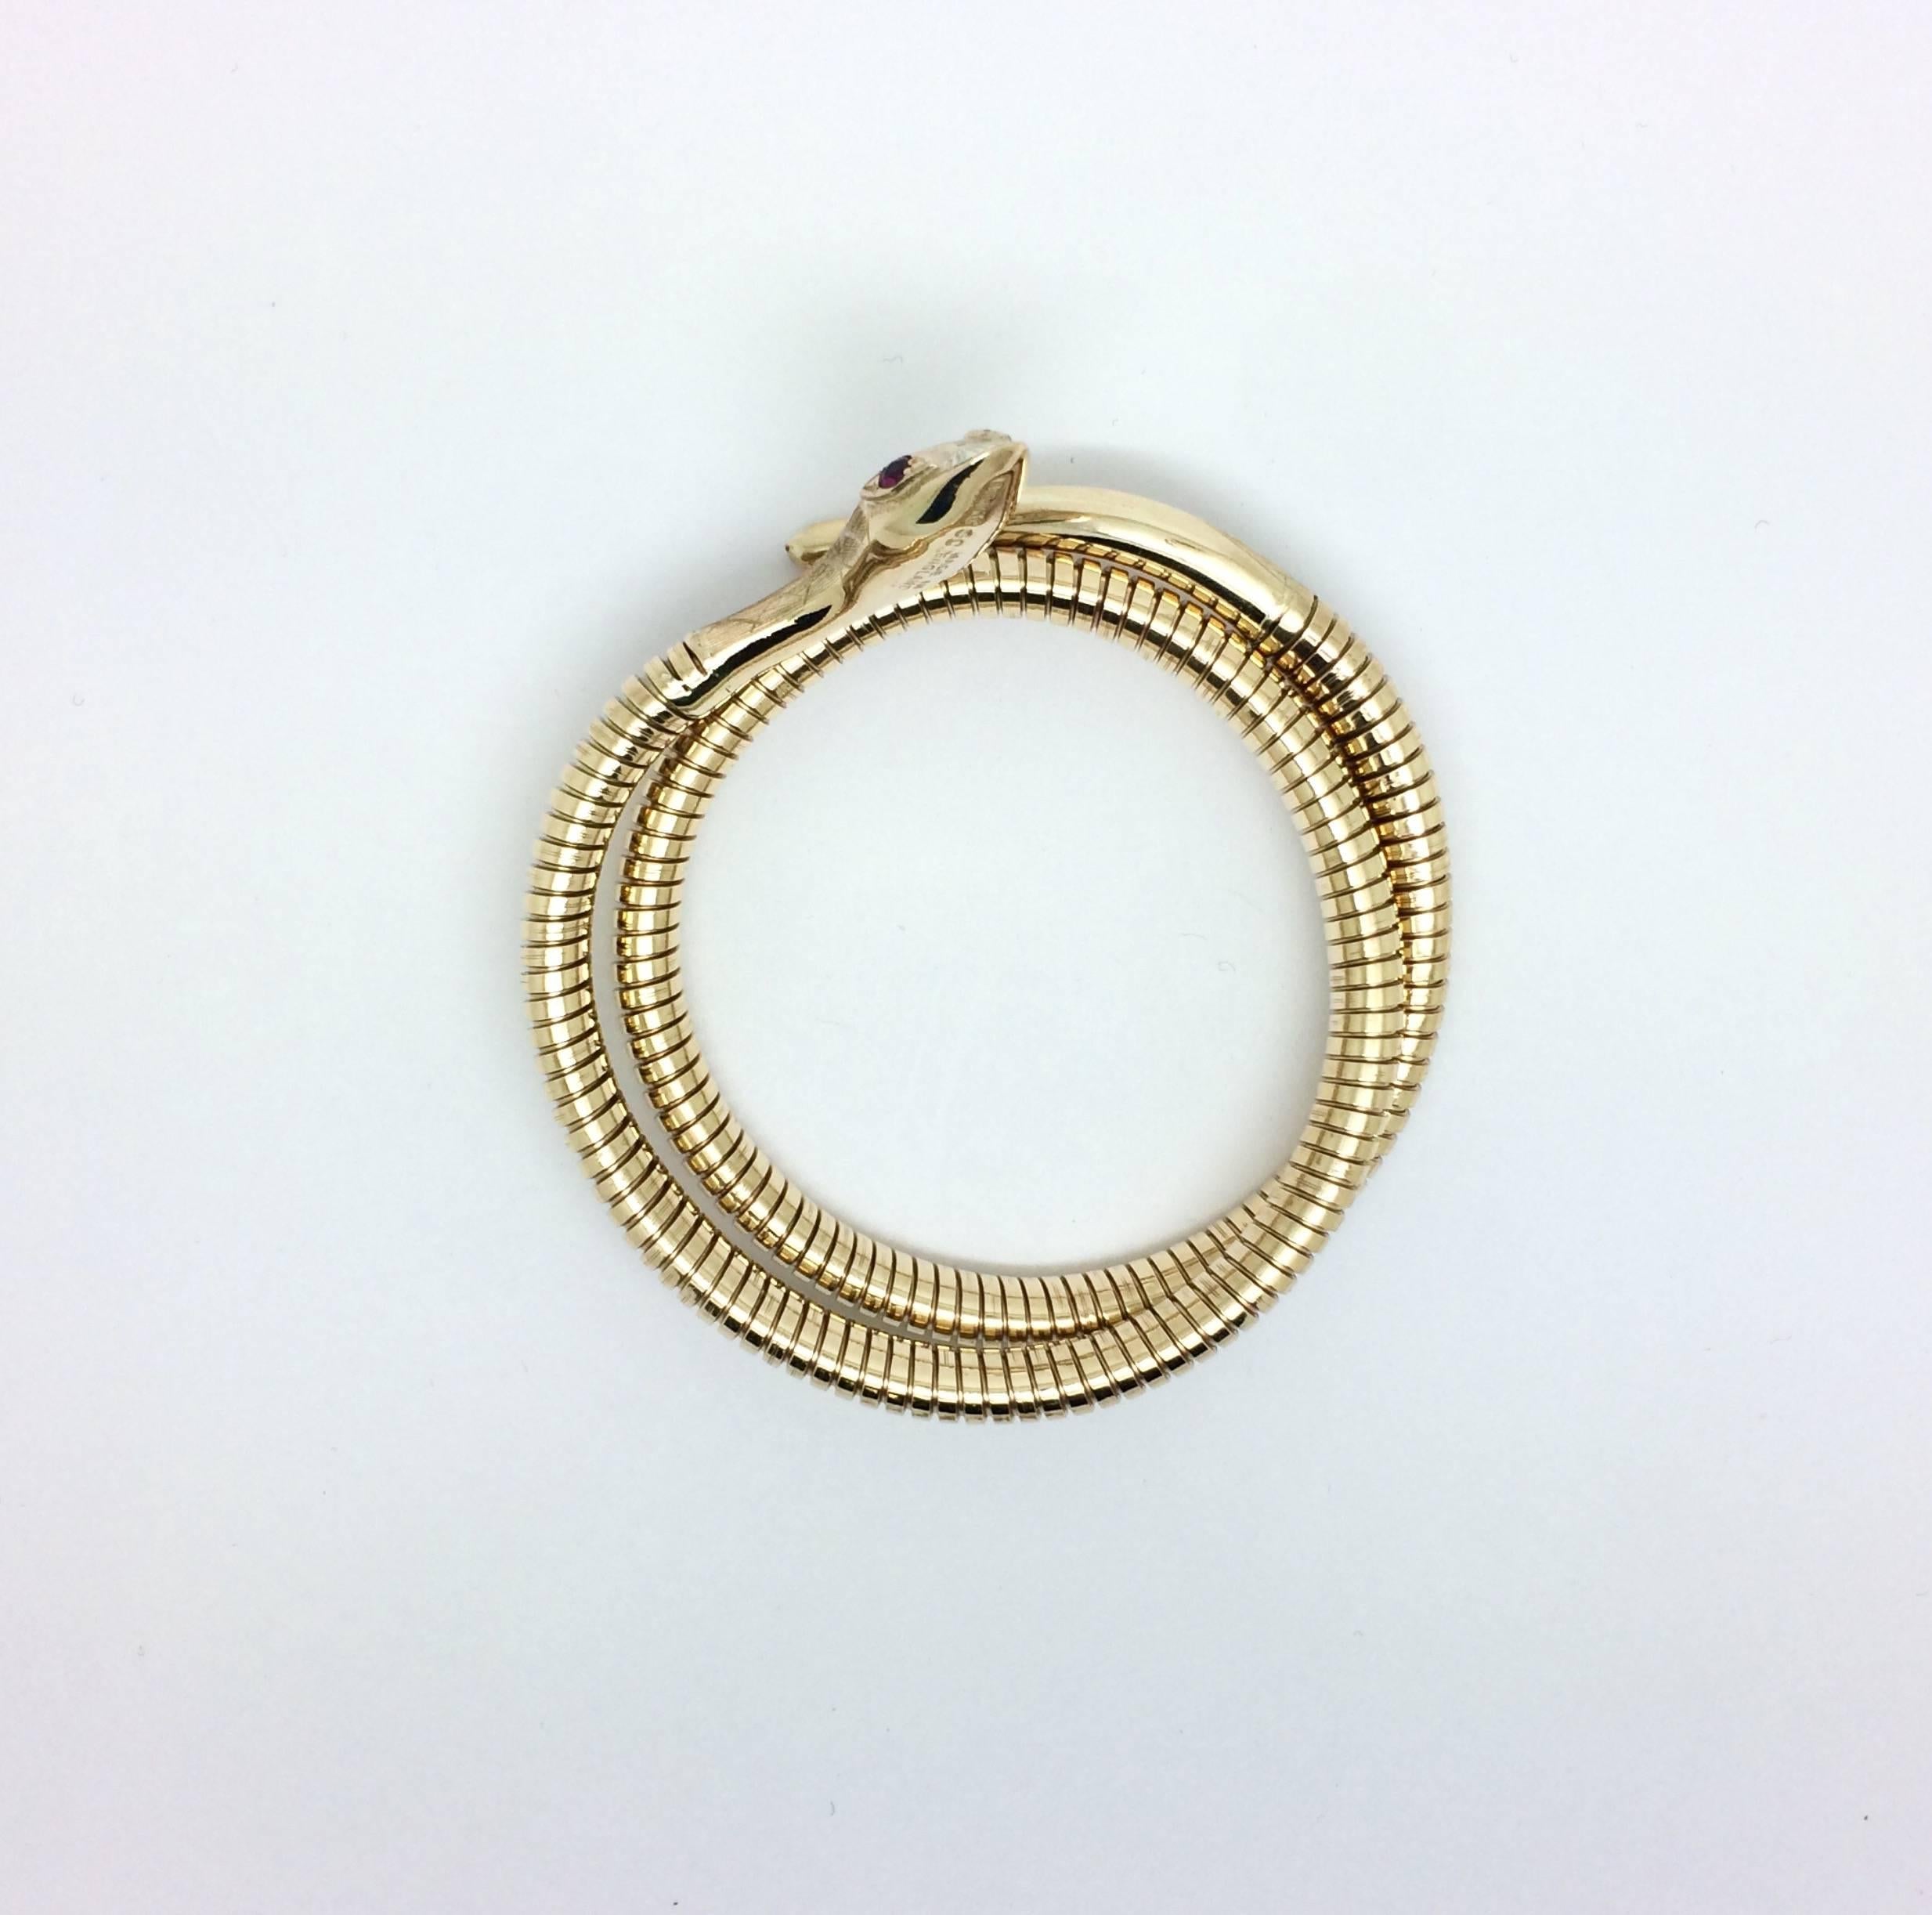 Snake coil 9kt yellow gold flexible bracelet, stamped BIRKS. A very comfortable piece to wear that is sure to receive compliments, from our estate with ruby eyes with intricate engraved head and tail. Approximately 28 grams in weight.